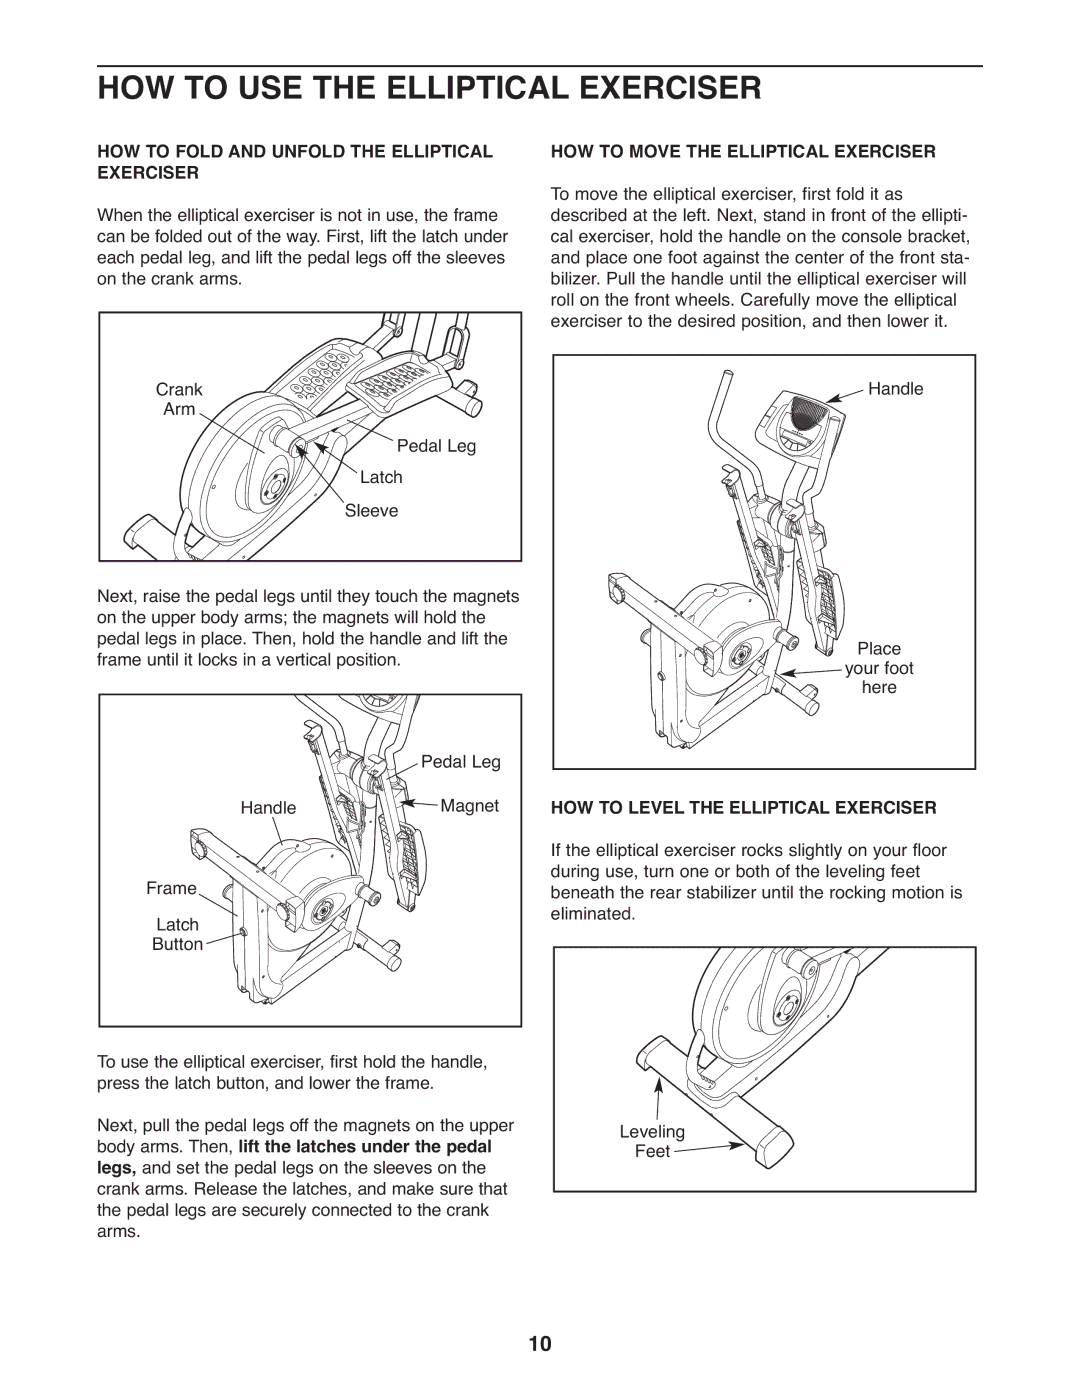 ProForm 831.28544.0 user manual HOW to USE the Elliptical Exerciser, HOW to Fold and Unfold the Elliptical Exerciser 